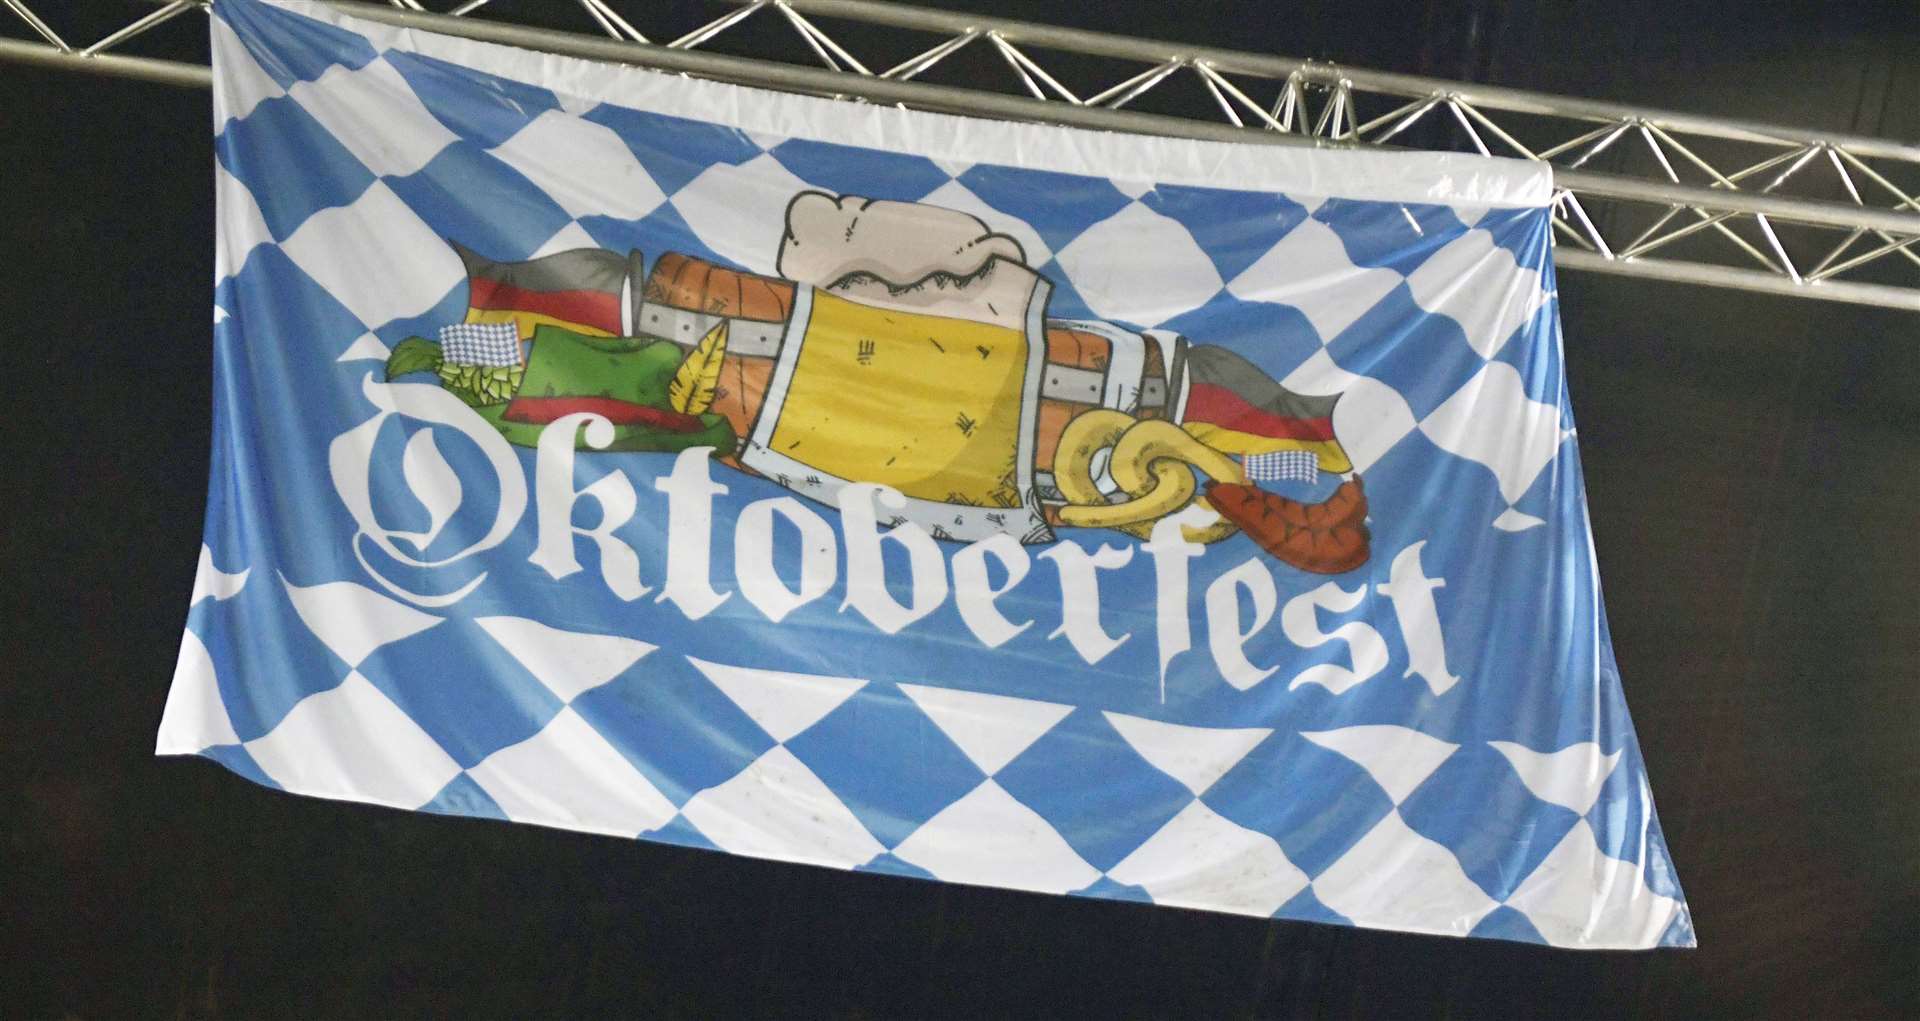 Oktoberfest is back with a British and Bavarian flavour Picture: Barry Goodwin